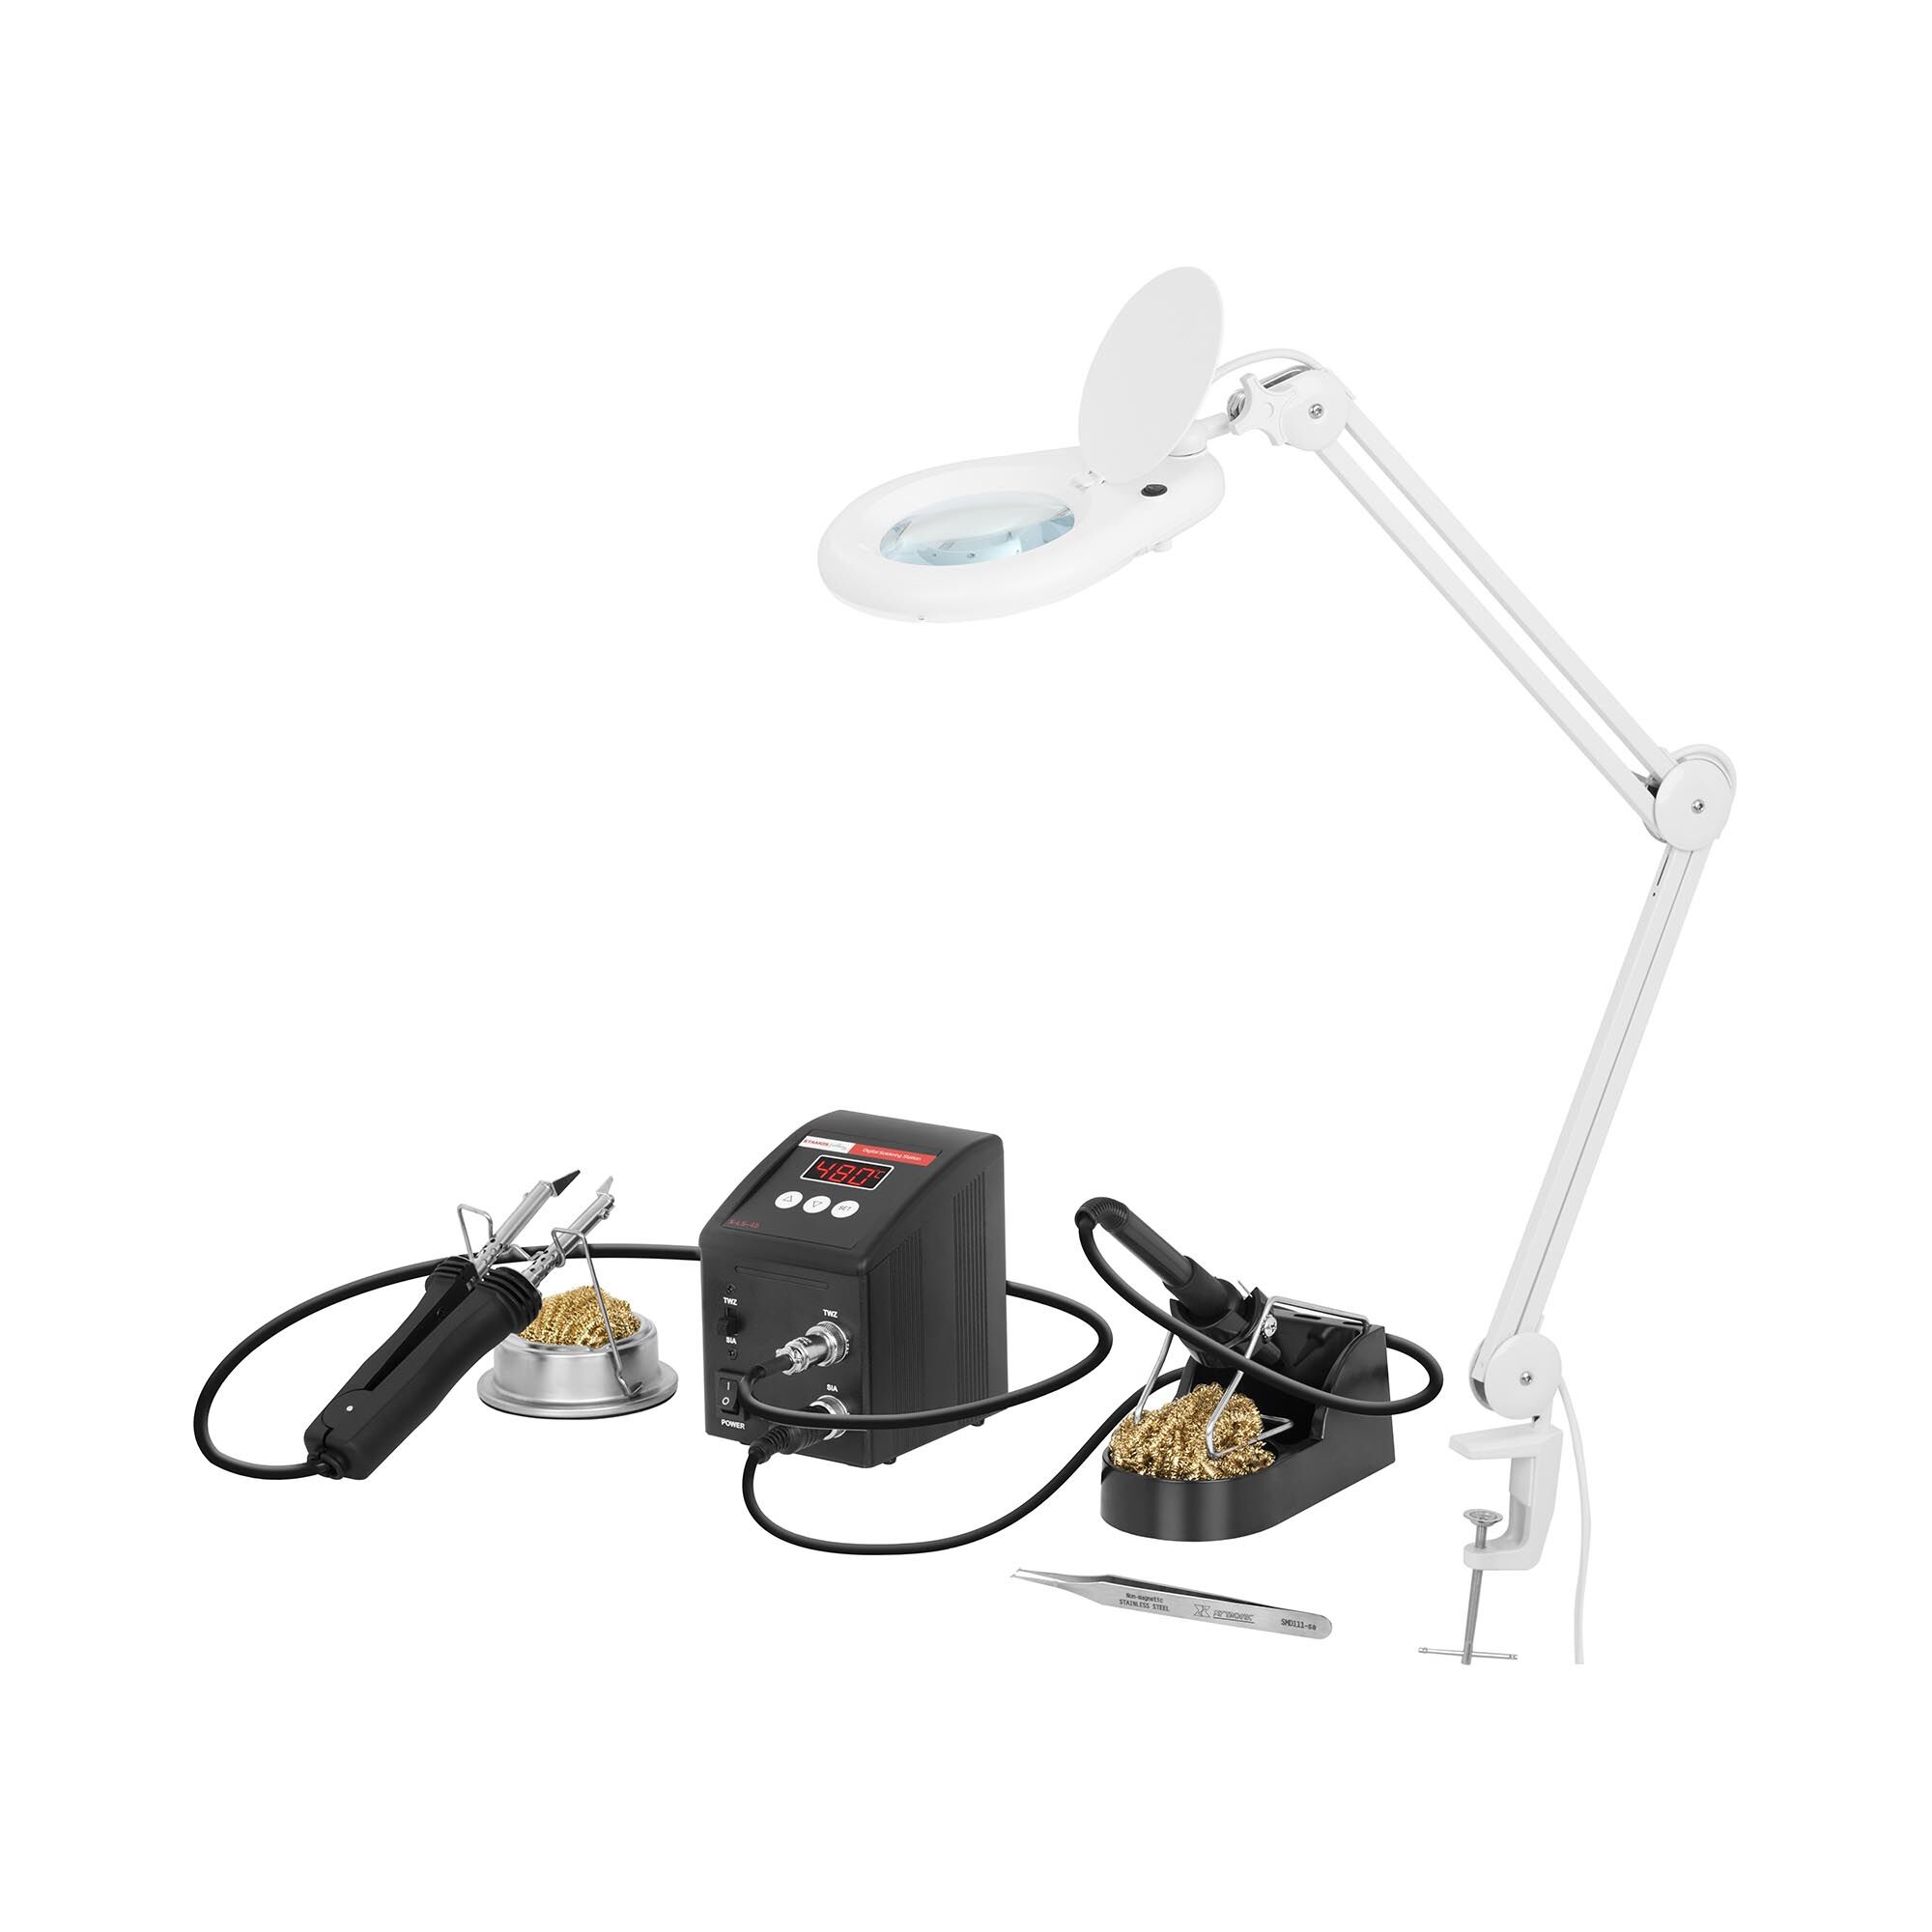 Stamos Soldering 2-in-1 Soldering Station with Magnifying Lamp - SMD - digital - 80 W - LED